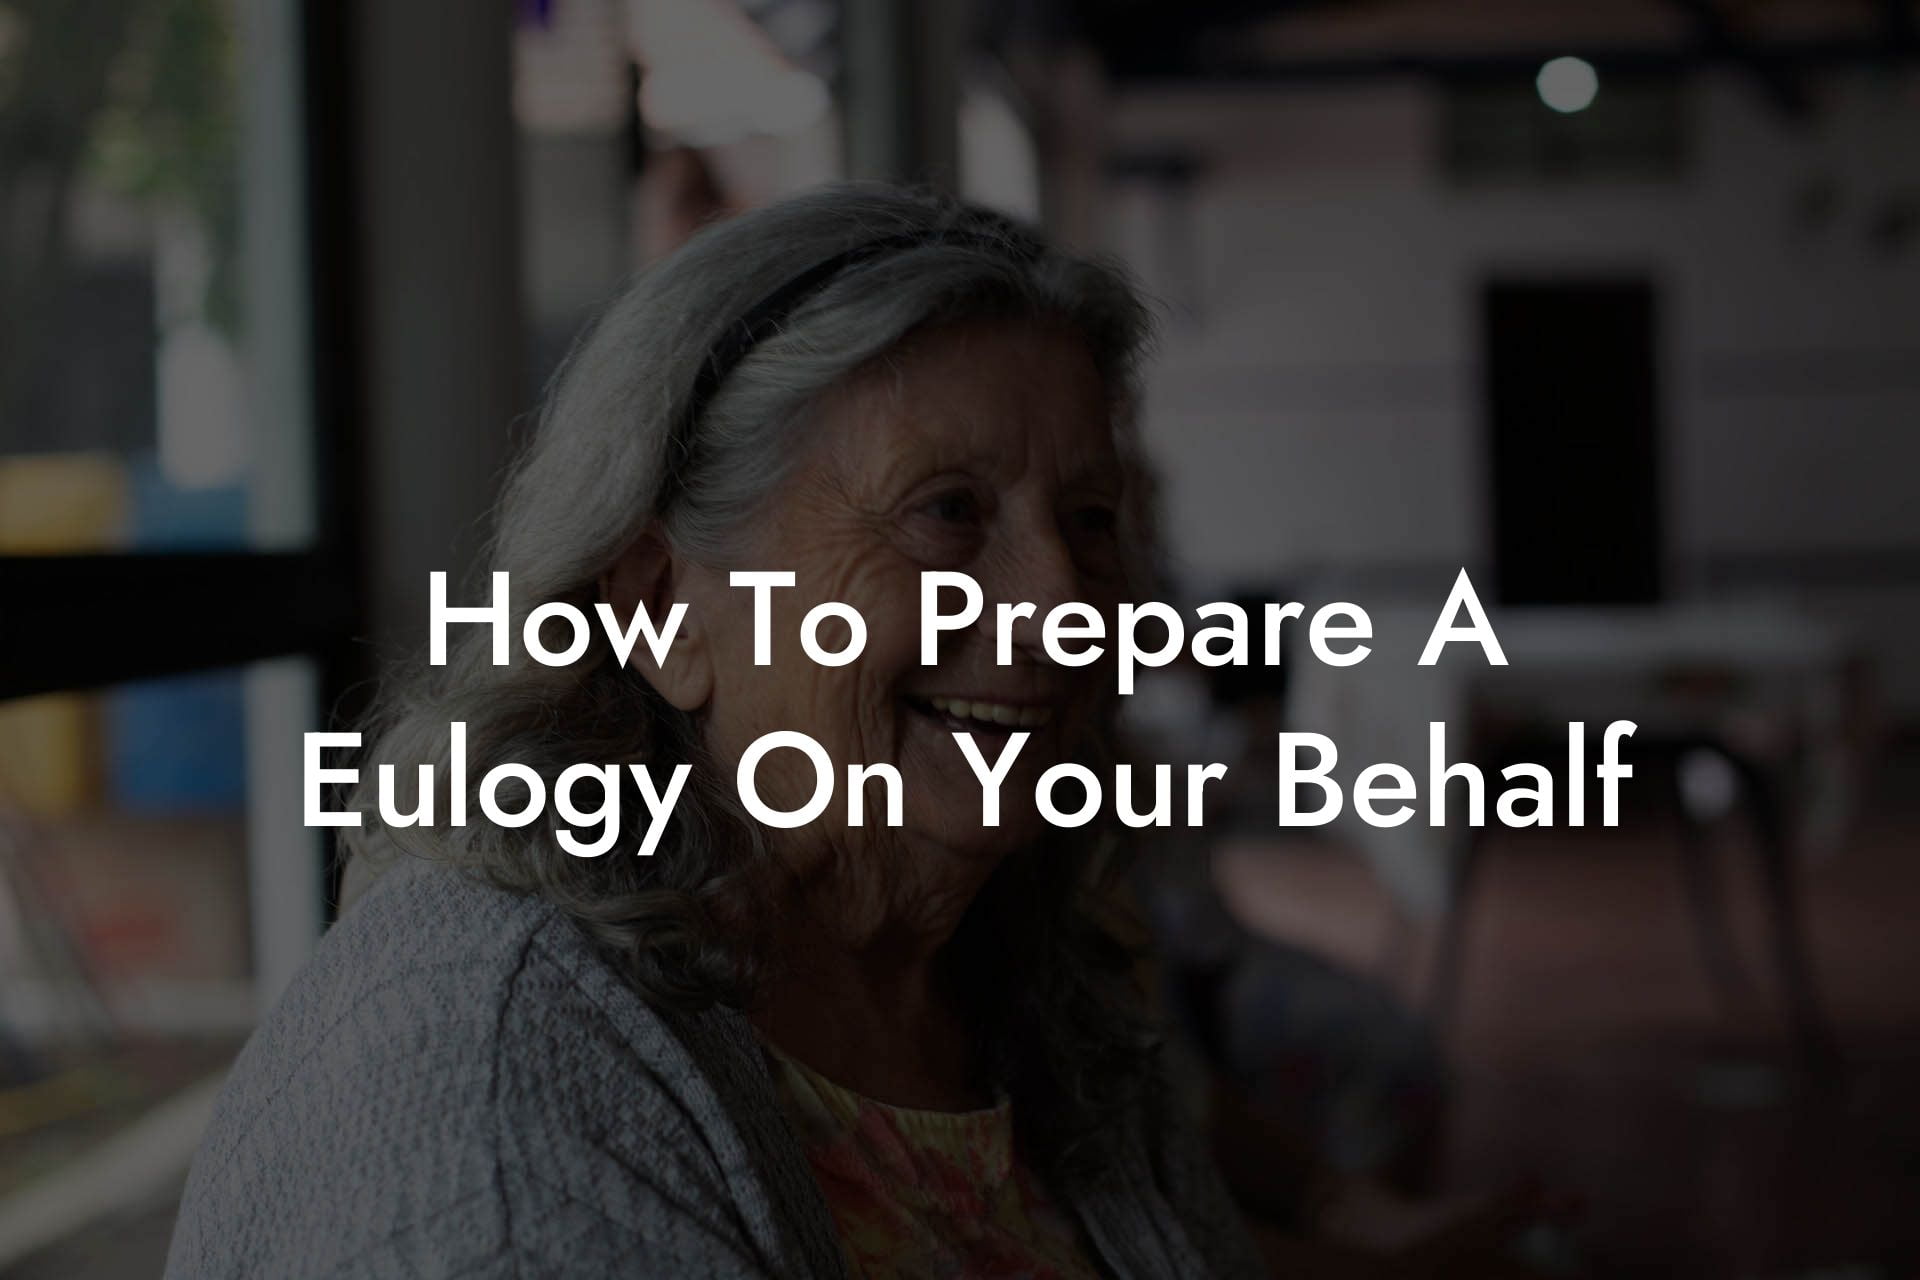 How To Prepare A Eulogy On Your Behalf